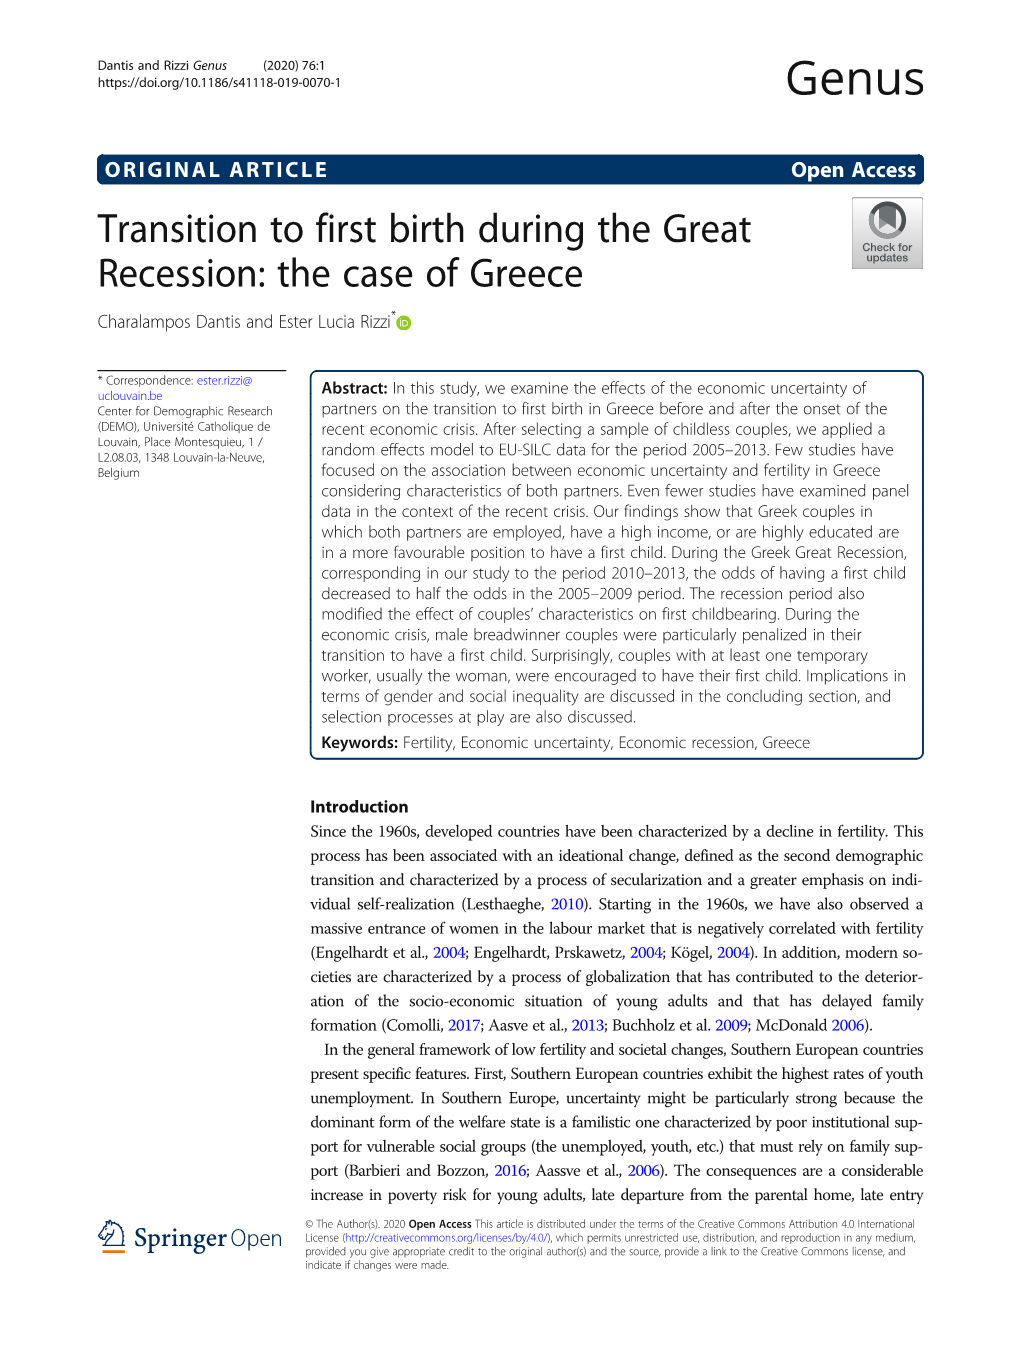 Transition to First Birth During the Great Recession: the Case of Greece Charalampos Dantis and Ester Lucia Rizzi*